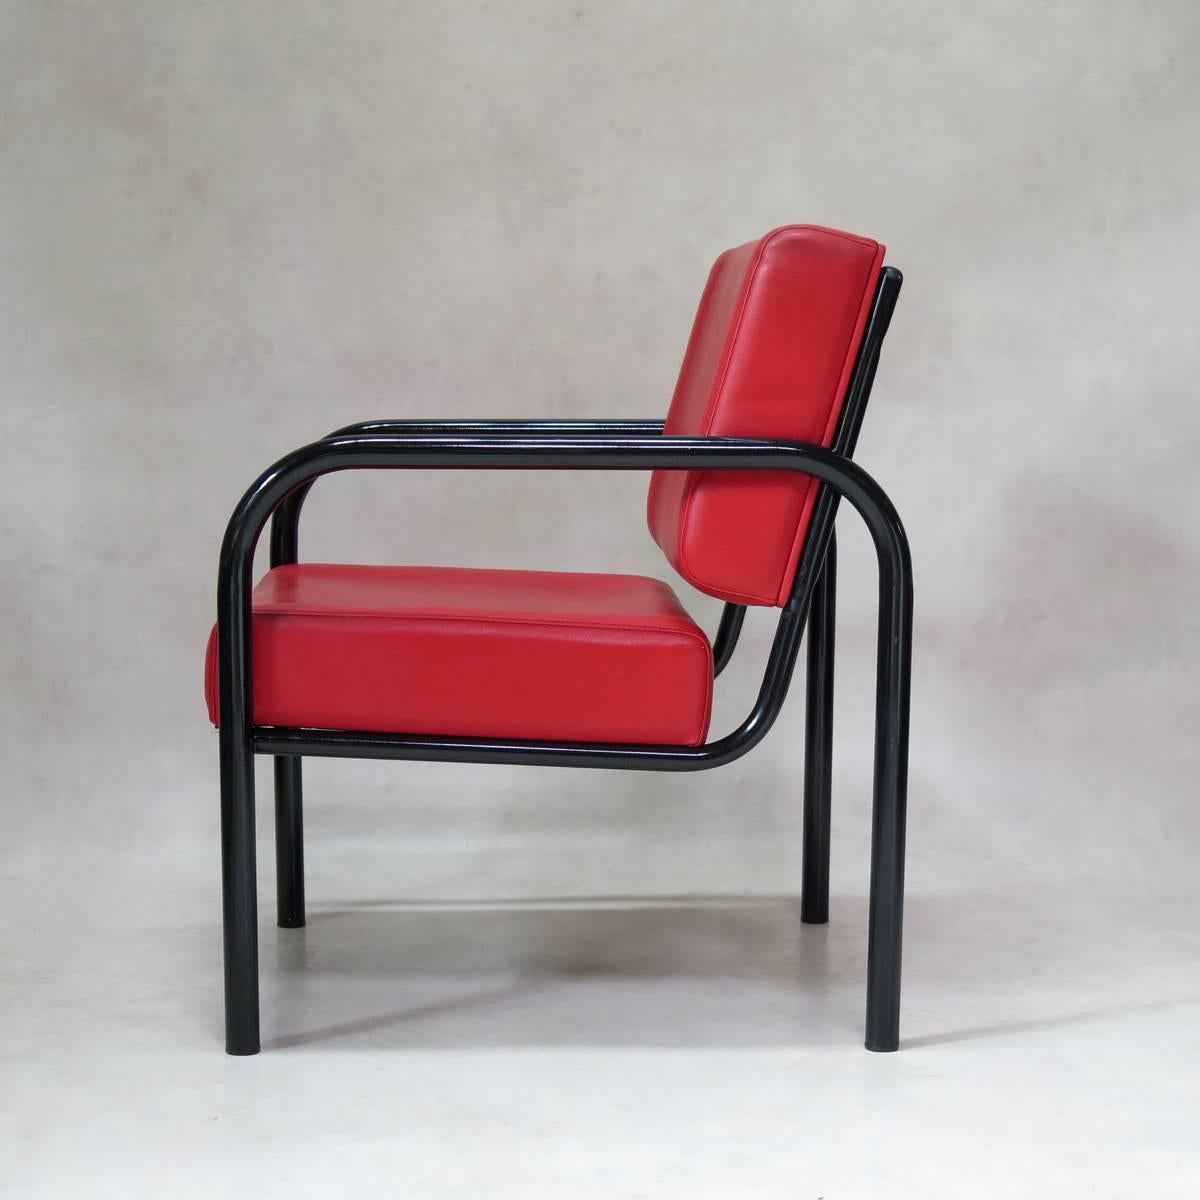 Wide and comfortable easy chair. The structure is made of tubular metal with a glossy black finish, and the seat and back are upholstered in original red leatherette. The height of the back is adjustable, as shown in the photos either resting flush